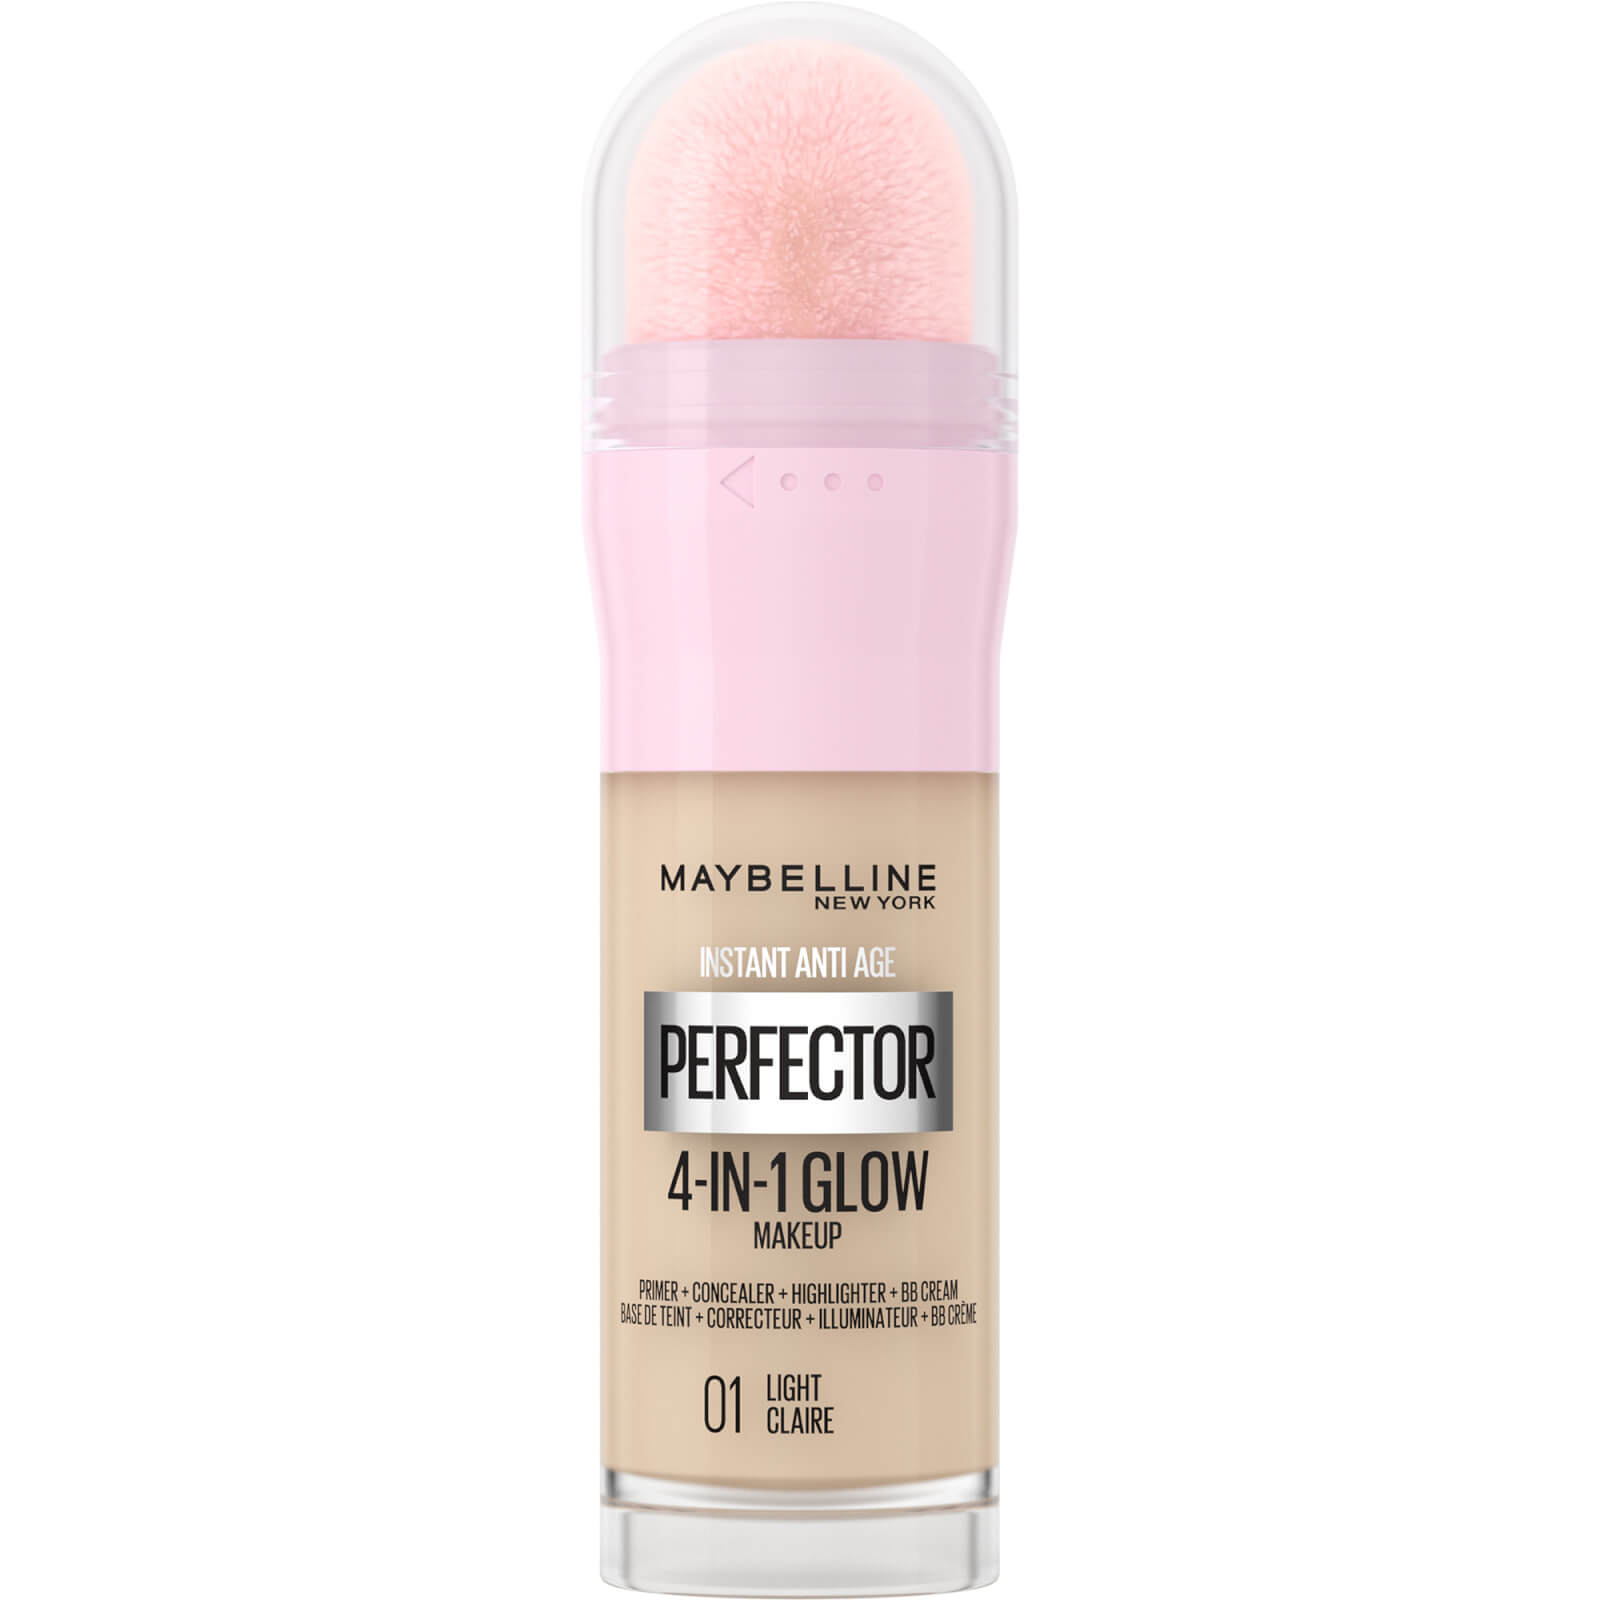 From Loreal_official_beautyshop <i>(by eBay)</i>